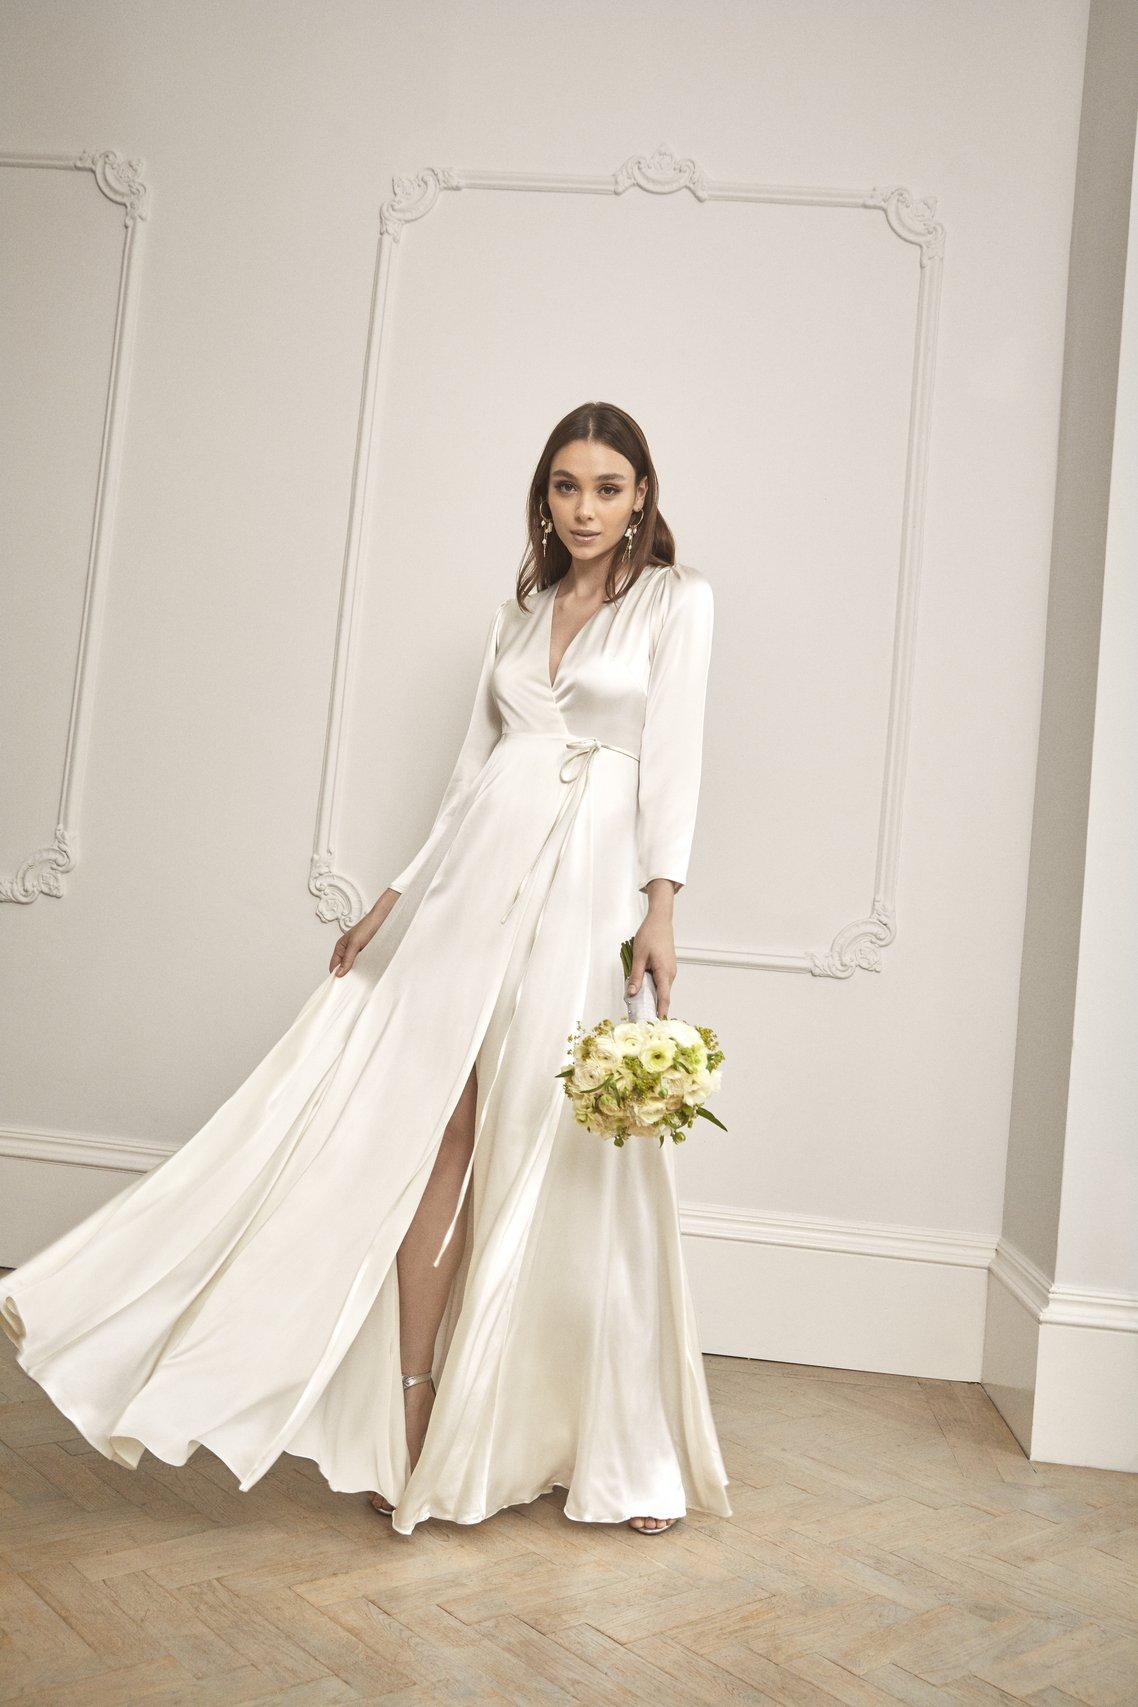 50 of the Best Simple Wedding Dresses ...